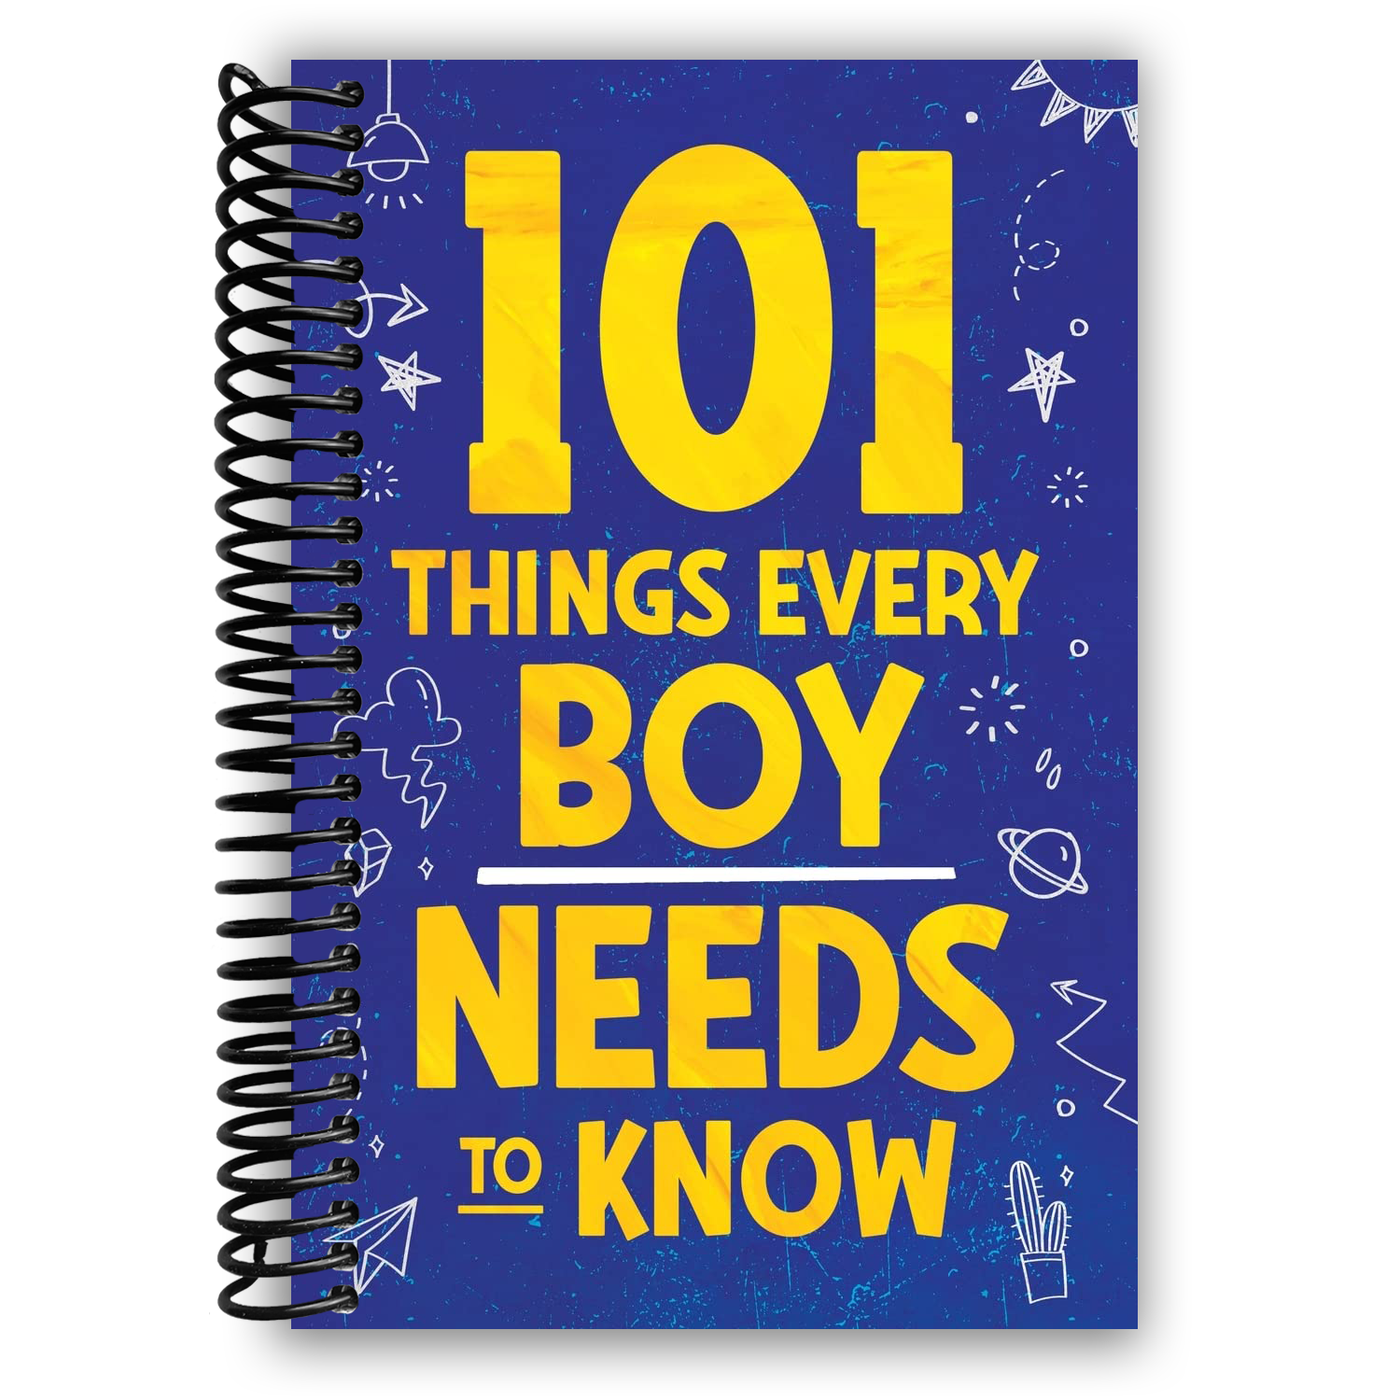 101 Things Every Boy Needs To Know: Important Life Advice for Teenage Boys! (Spiral Bound)